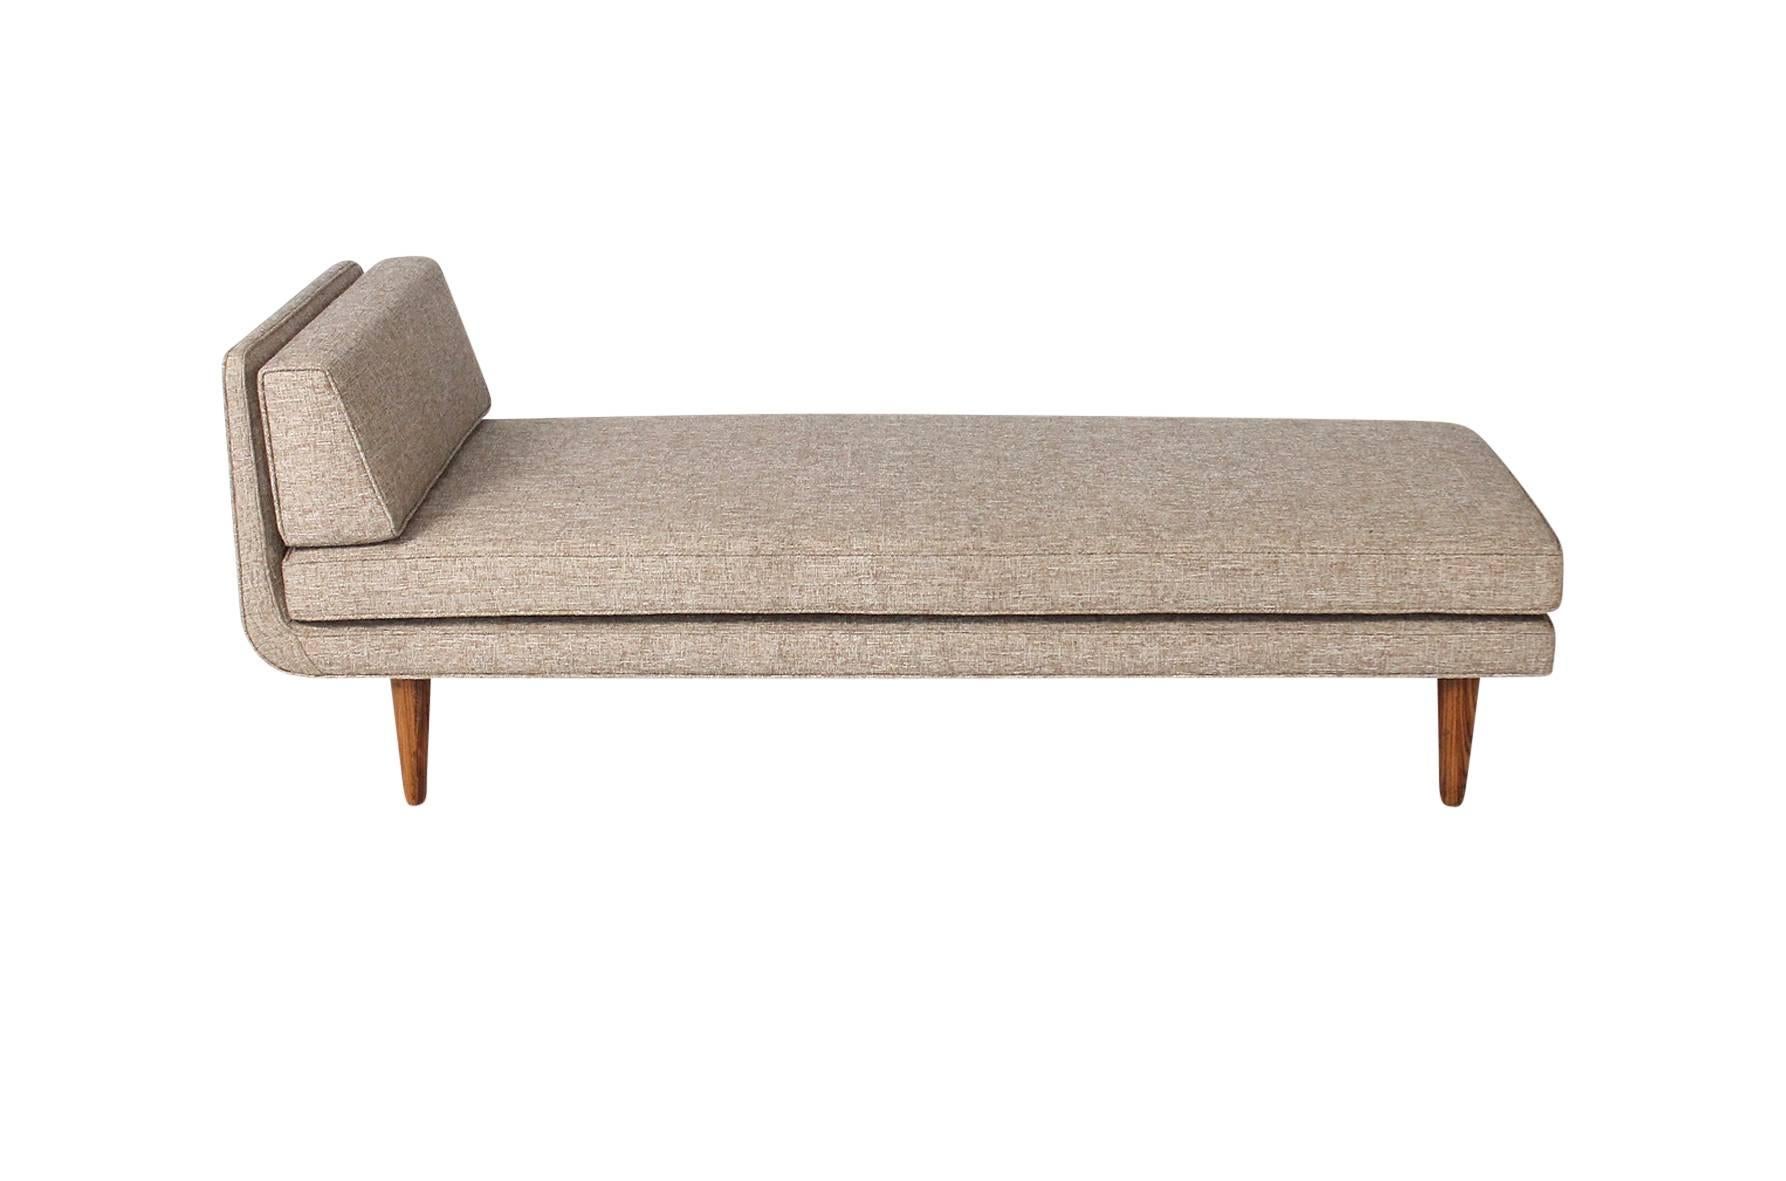 Rare daybed by Edward Wormley for Dunbar. Upholstered with tapering rosewood legs.